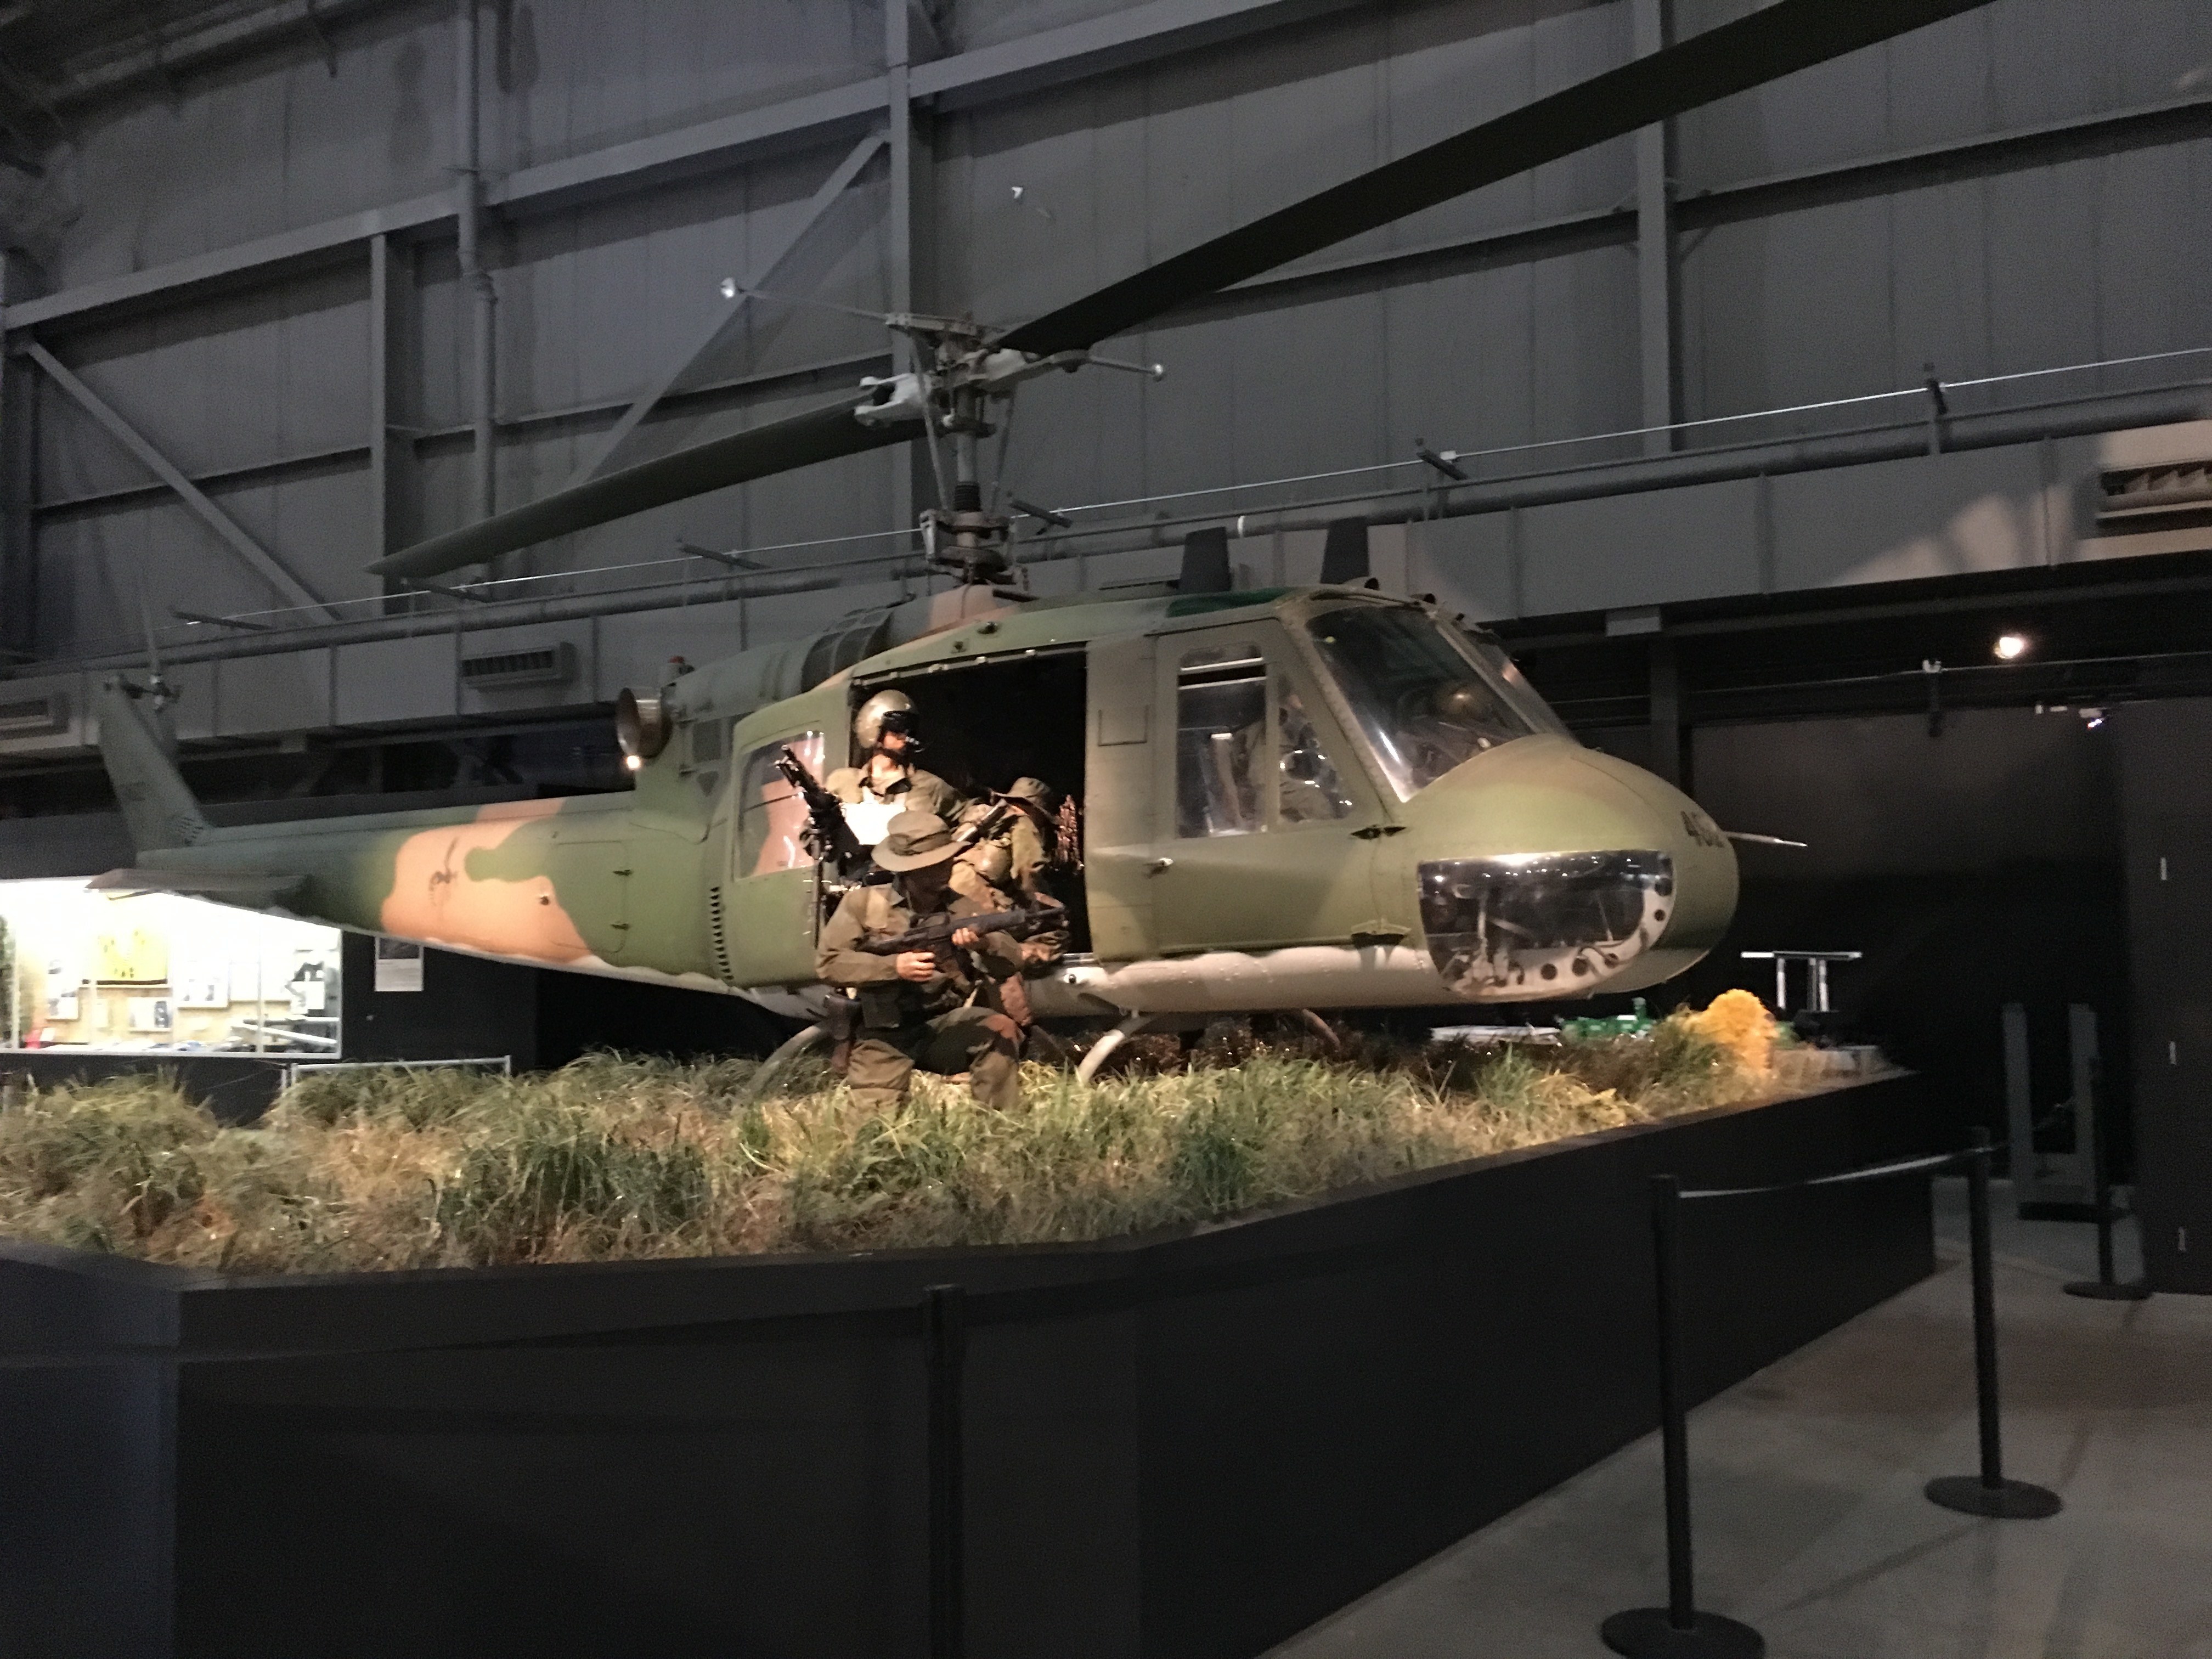 A Helicopter from the Southeast Asian Conflict